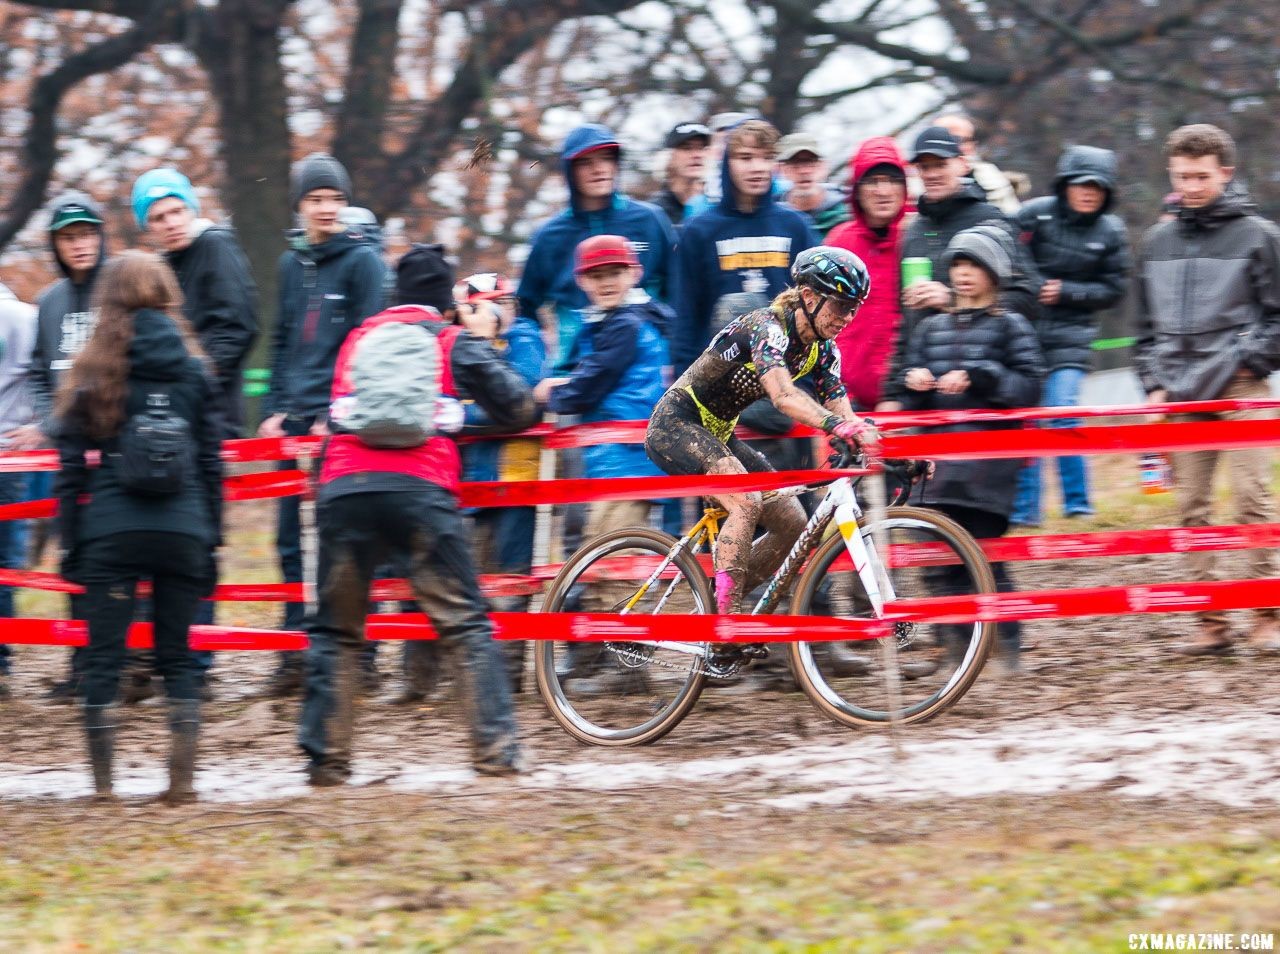 The single speed category is known for its less than formal attitude. Singlespeed Women. 2018 Cyclocross National Championships, Louisville, KY. © A. Yee / Cyclocross Magazine